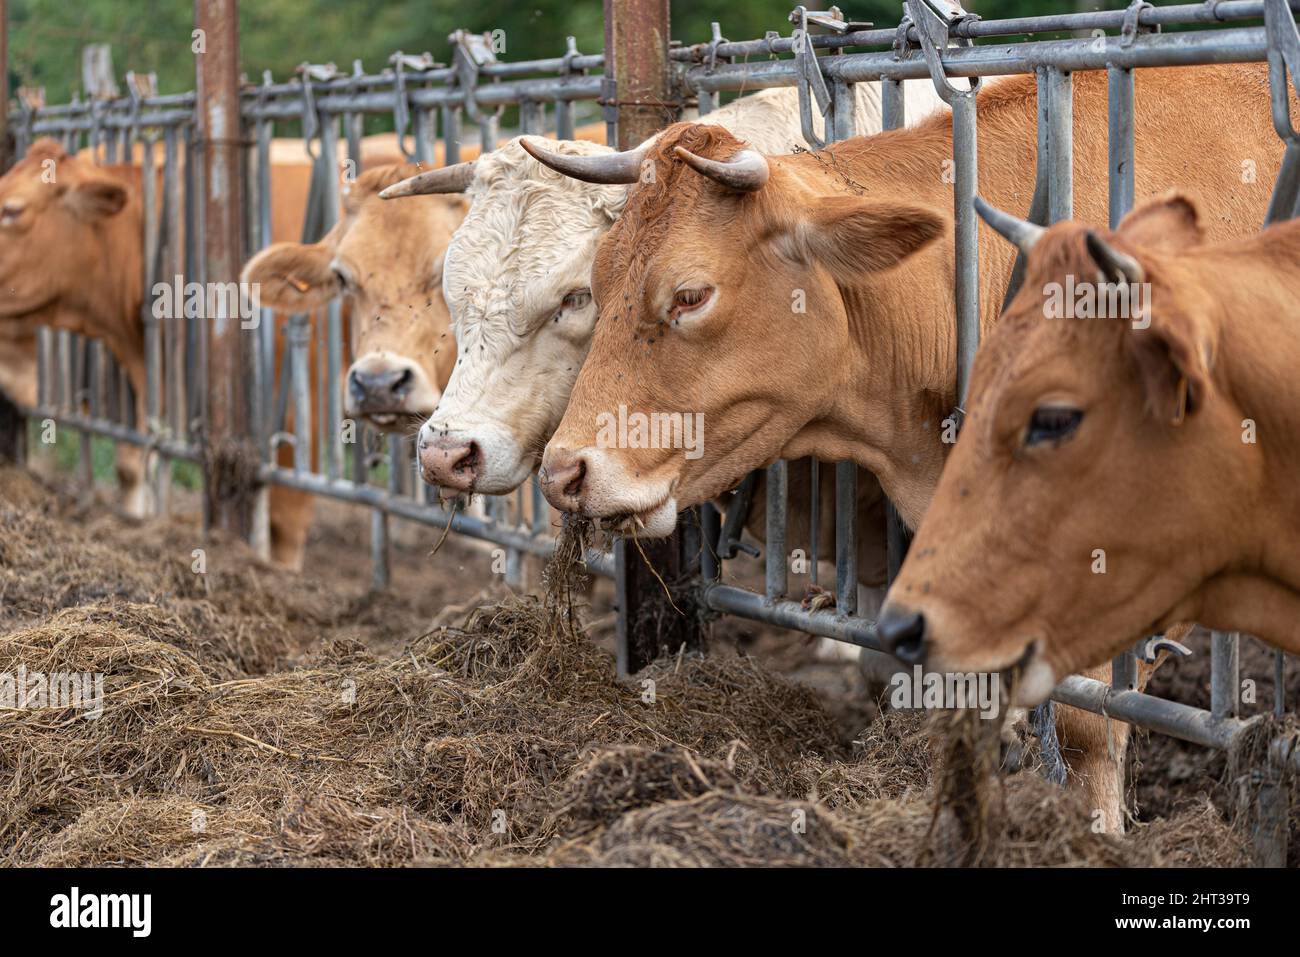 Cows eating straw on the farm in the open air Stock Photo